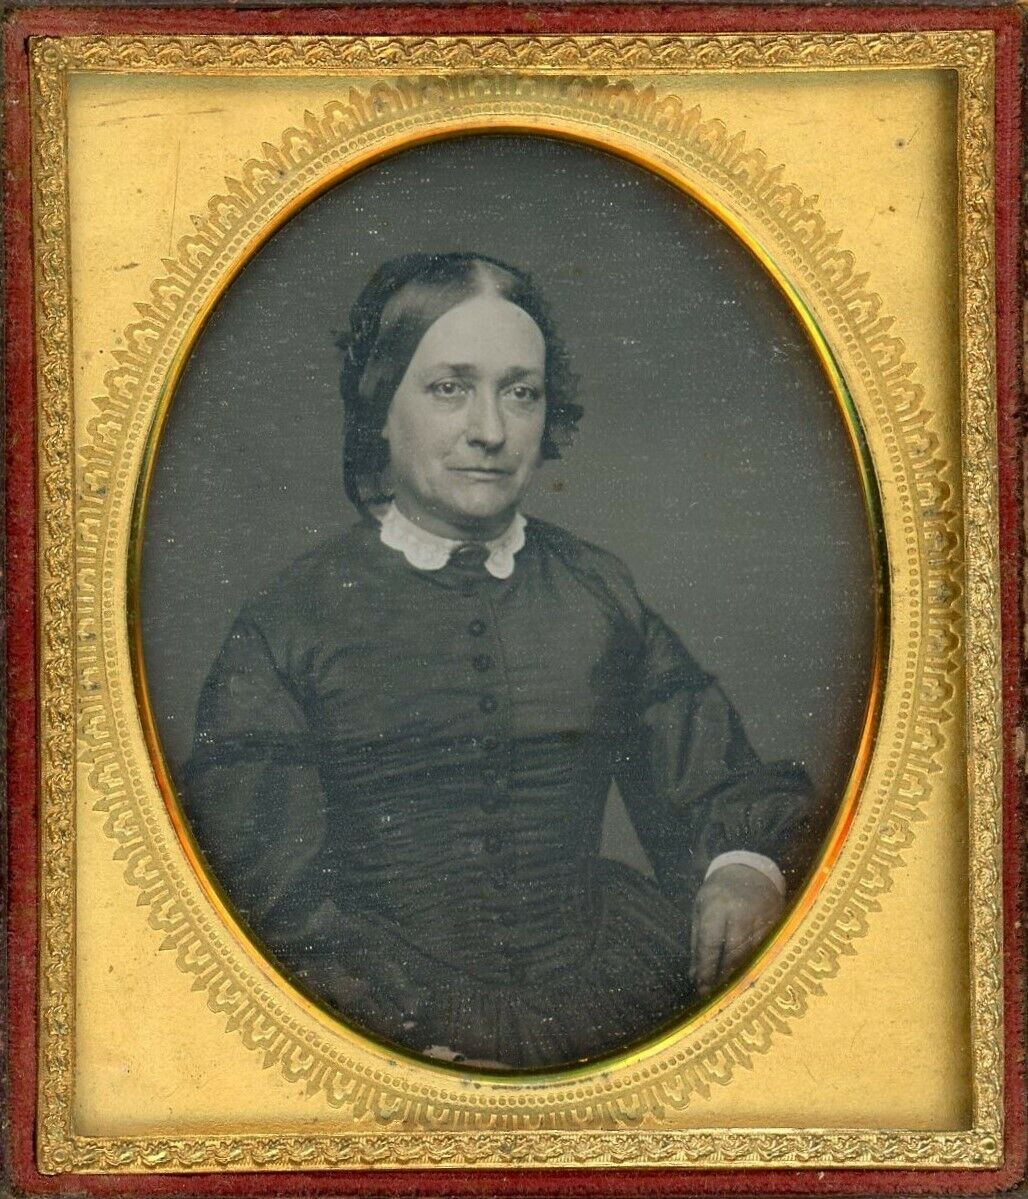 Unidentified Woman Slightly Smiling (1/6 Plate Daguerreotype)